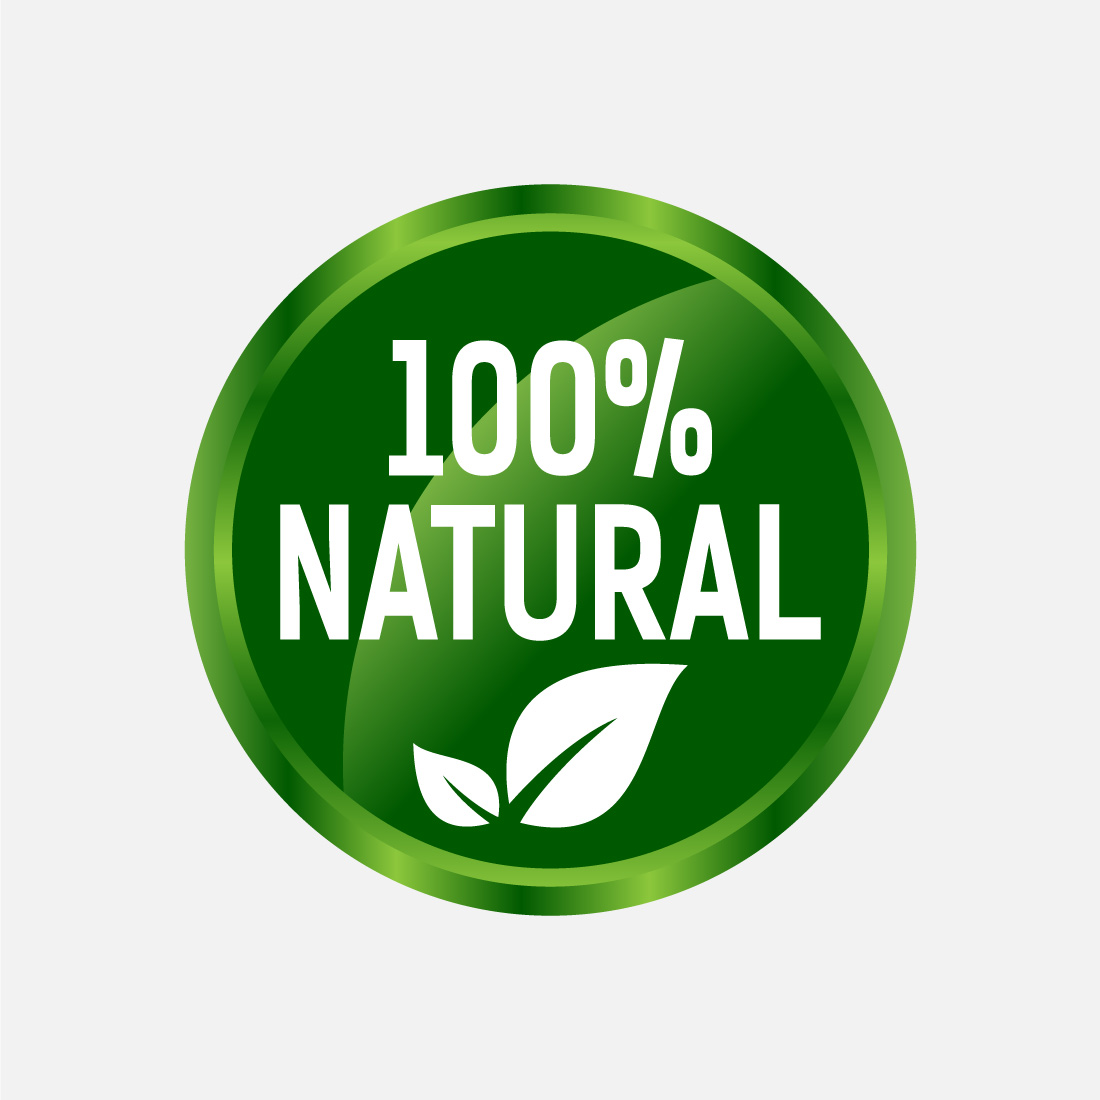 Natural Organic Product Logo Graphic by Acongraphic · Creative Fabrica